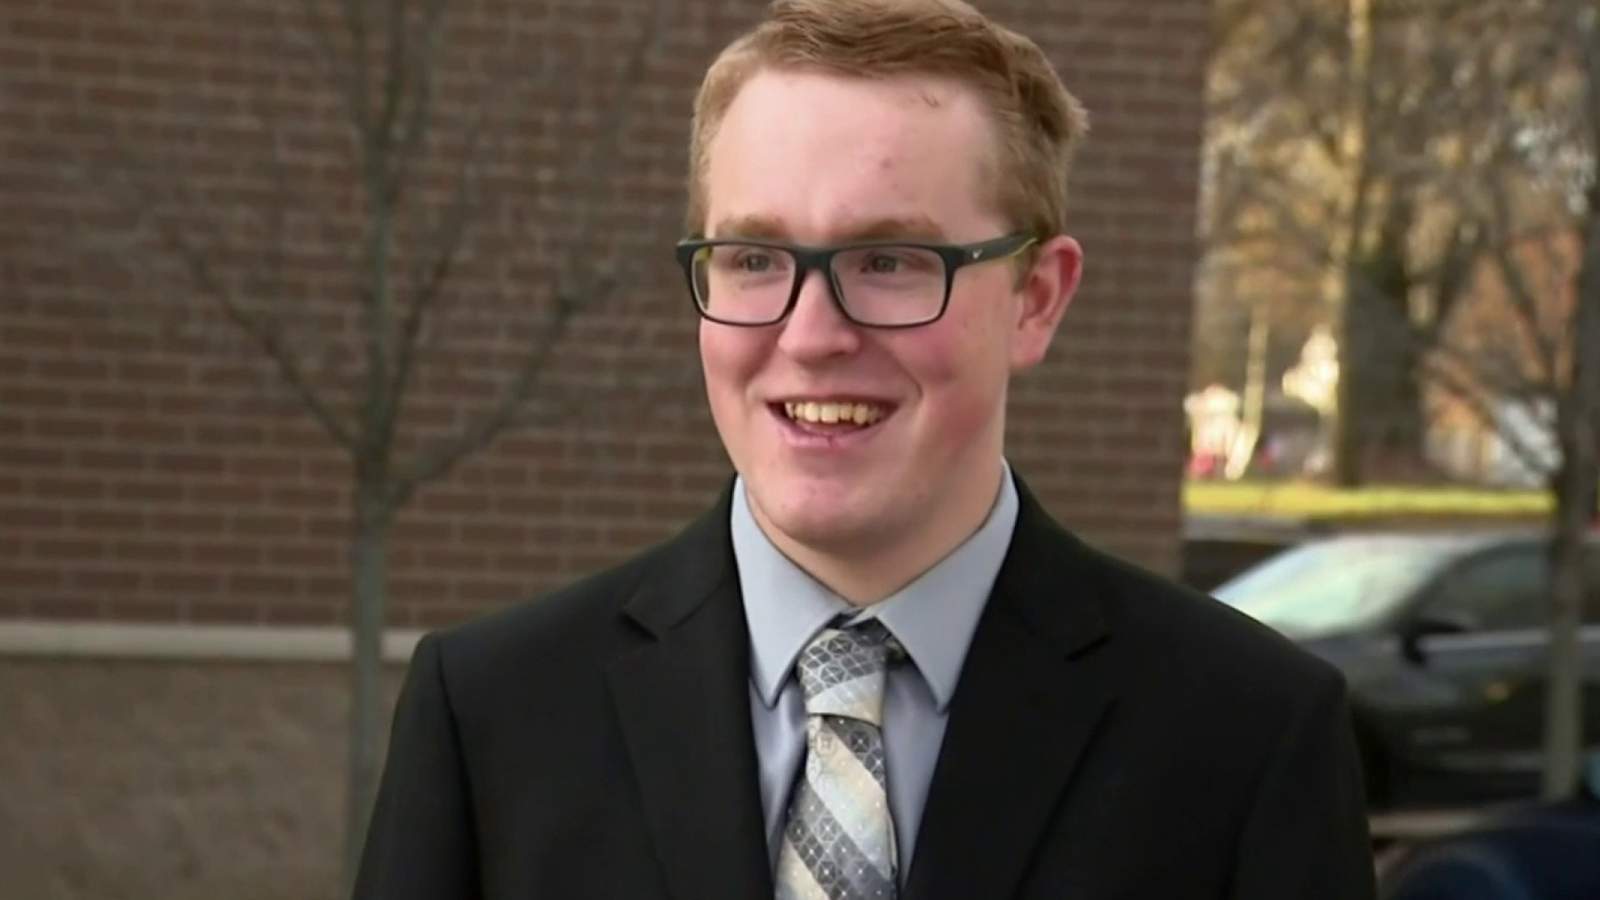 18-year-old elected to L’Anse Creuse school board in Clinton Township